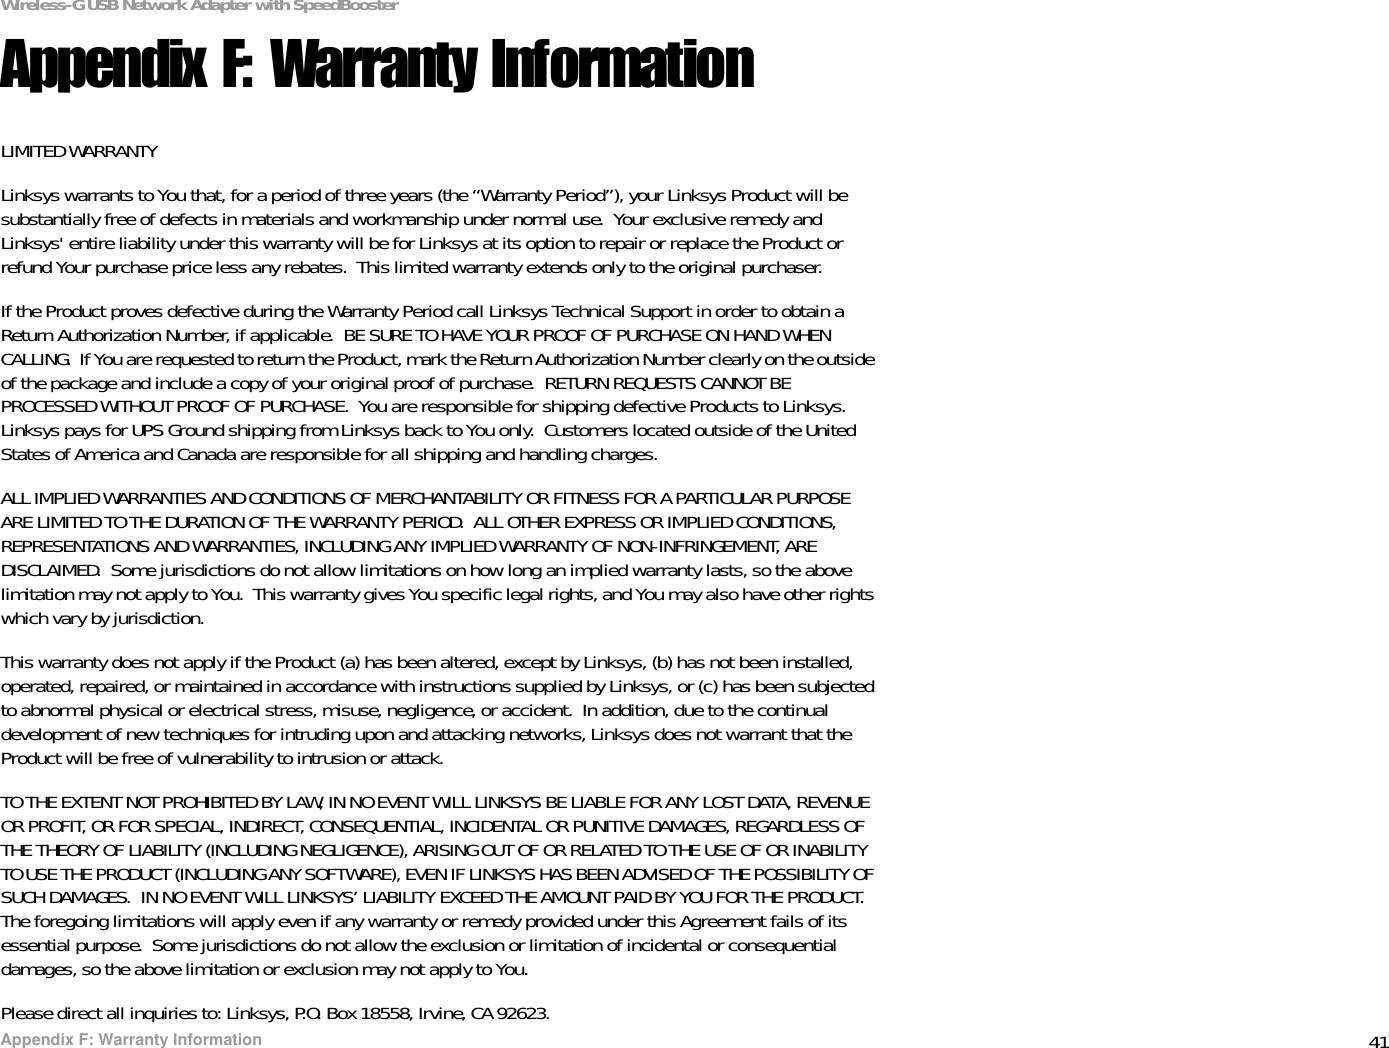 41Appendix F: Warranty InformationWireless-G USB Network Adapter with SpeedBoosterAppendix F: Warranty InformationLIMITED WARRANTYLinksys warrants to You that, for a period of three years (the “Warranty Period”), your Linksys Product will be substantially free of defects in materials and workmanship under normal use.  Your exclusive remedy and Linksys&apos; entire liability under this warranty will be for Linksys at its option to repair or replace the Product or refund Your purchase price less any rebates.  This limited warranty extends only to the original purchaser.  If the Product proves defective during the Warranty Period call Linksys Technical Support in order to obtain a Return Authorization Number, if applicable.  BE SURE TO HAVE YOUR PROOF OF PURCHASE ON HAND WHEN CALLING.  If You are requested to return the Product, mark the Return Authorization Number clearly on the outside of the package and include a copy of your original proof of purchase.  RETURN REQUESTS CANNOT BE PROCESSED WITHOUT PROOF OF PURCHASE.  You are responsible for shipping defective Products to Linksys.  Linksys pays for UPS Ground shipping from Linksys back to You only.  Customers located outside of the United States of America and Canada are responsible for all shipping and handling charges. ALL IMPLIED WARRANTIES AND CONDITIONS OF MERCHANTABILITY OR FITNESS FOR A PARTICULAR PURPOSE ARE LIMITED TO THE DURATION OF THE WARRANTY PERIOD.  ALL OTHER EXPRESS OR IMPLIED CONDITIONS, REPRESENTATIONS AND WARRANTIES, INCLUDING ANY IMPLIED WARRANTY OF NON-INFRINGEMENT, ARE DISCLAIMED.  Some jurisdictions do not allow limitations on how long an implied warranty lasts, so the above limitation may not apply to You.  This warranty gives You specific legal rights, and You may also have other rights which vary by jurisdiction.This warranty does not apply if the Product (a) has been altered, except by Linksys, (b) has not been installed, operated, repaired, or maintained in accordance with instructions supplied by Linksys, or (c) has been subjected to abnormal physical or electrical stress, misuse, negligence, or accident.  In addition, due to the continual development of new techniques for intruding upon and attacking networks, Linksys does not warrant that the Product will be free of vulnerability to intrusion or attack.TO THE EXTENT NOT PROHIBITED BY LAW, IN NO EVENT WILL LINKSYS BE LIABLE FOR ANY LOST DATA, REVENUE OR PROFIT, OR FOR SPECIAL, INDIRECT, CONSEQUENTIAL, INCIDENTAL OR PUNITIVE DAMAGES, REGARDLESS OF THE THEORY OF LIABILITY (INCLUDING NEGLIGENCE), ARISING OUT OF OR RELATED TO THE USE OF OR INABILITY TO USE THE PRODUCT (INCLUDING ANY SOFTWARE), EVEN IF LINKSYS HAS BEEN ADVISED OF THE POSSIBILITY OF SUCH DAMAGES.  IN NO EVENT WILL LINKSYS’ LIABILITY EXCEED THE AMOUNT PAID BY YOU FOR THE PRODUCT.  The foregoing limitations will apply even if any warranty or remedy provided under this Agreement fails of its essential purpose.  Some jurisdictions do not allow the exclusion or limitation of incidental or consequential damages, so the above limitation or exclusion may not apply to You.Please direct all inquiries to: Linksys, P.O. Box 18558, Irvine, CA 92623.